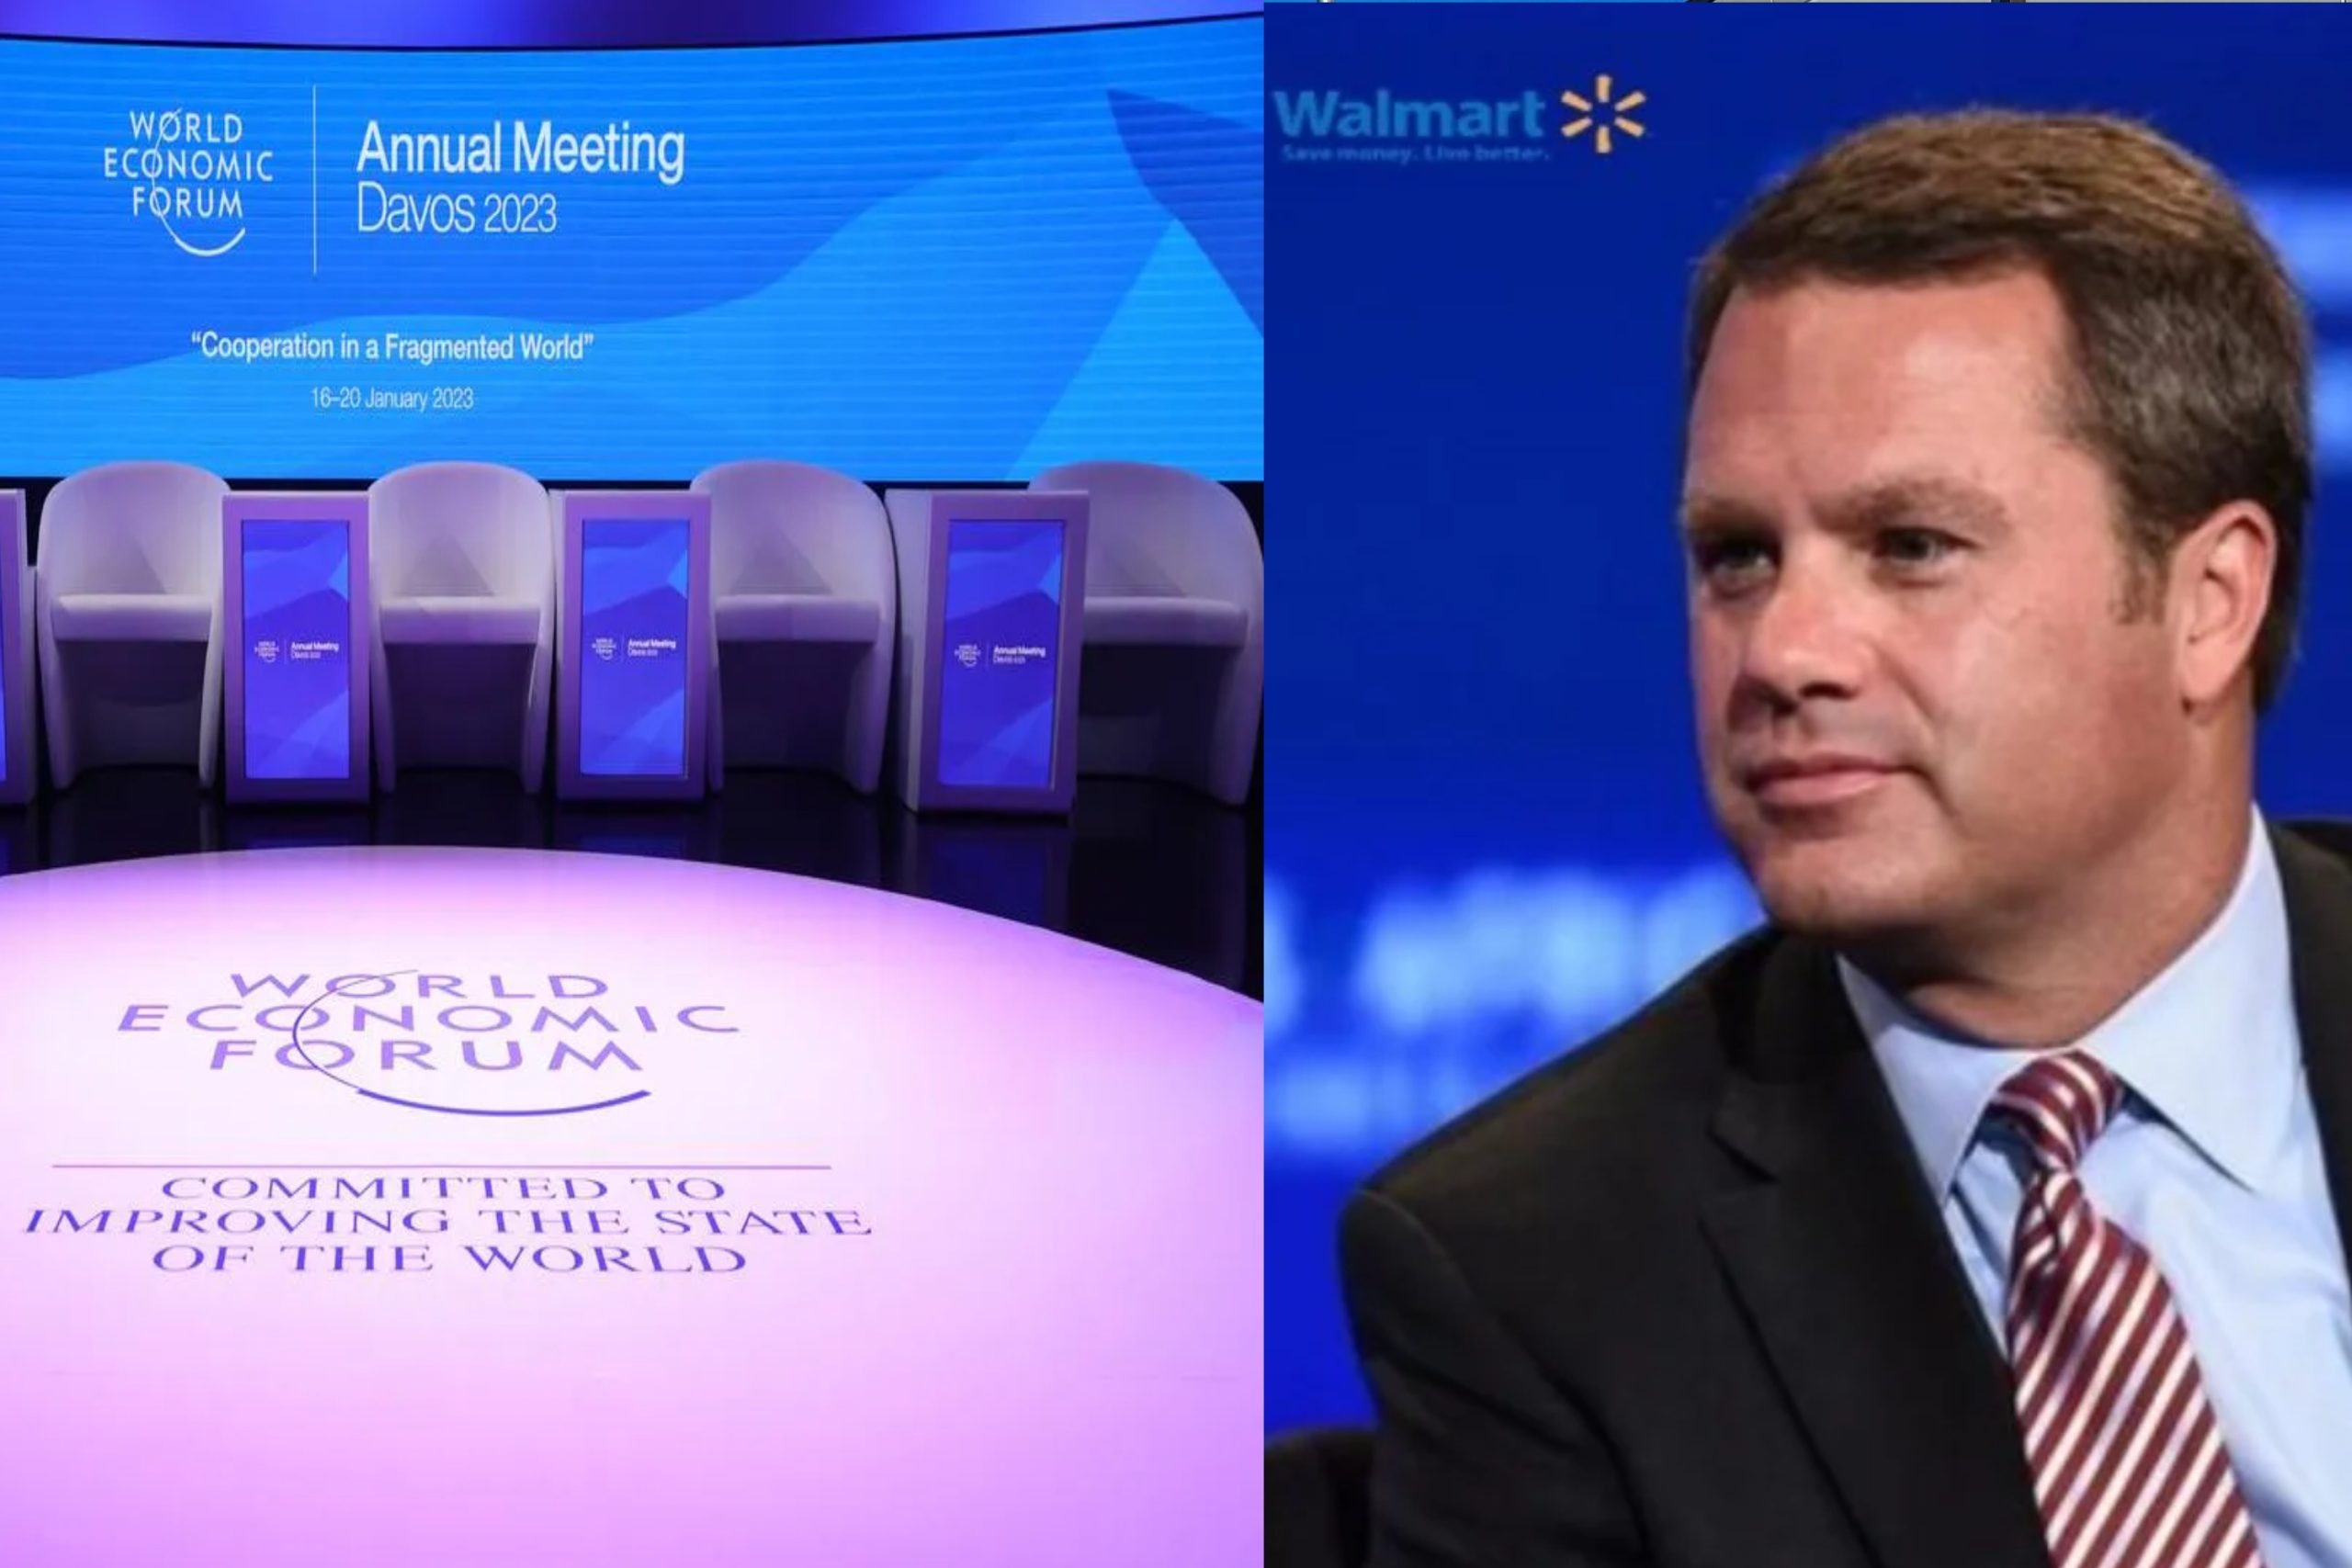 Sustainable and climate-friendly products need to be affordable, Walmart CEO says at Davos